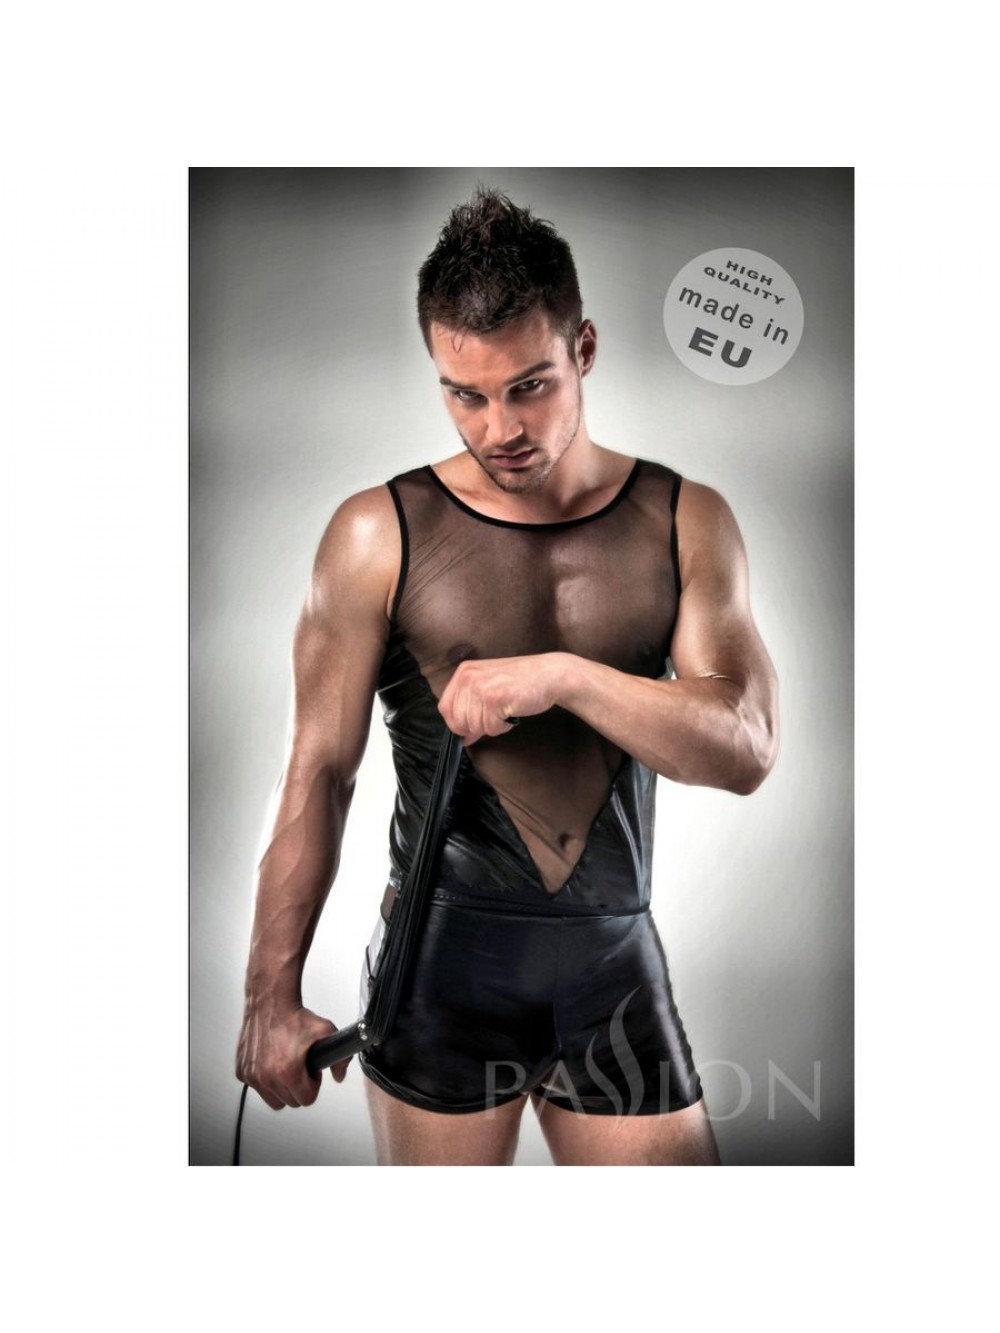 BODY LEATHER CLEAR FETISH BY PASSION MEN LINGERIE. L/XL 5908305907756